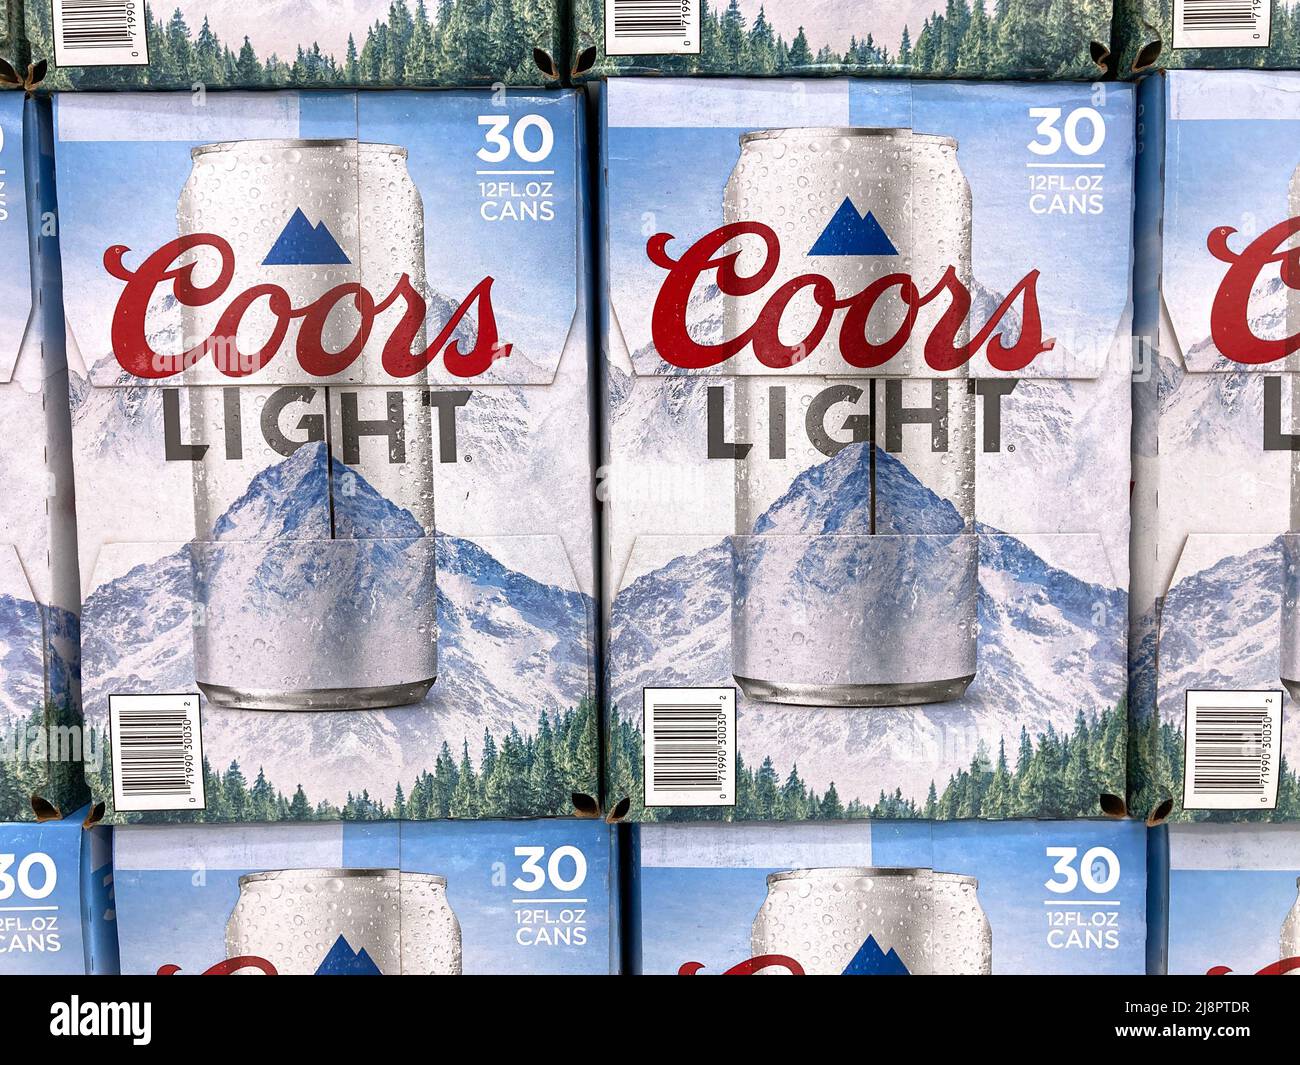 Coors Light 30 pack beer cans display at grocery store - Golden, Colorado, USA - 2022 Stock Photo